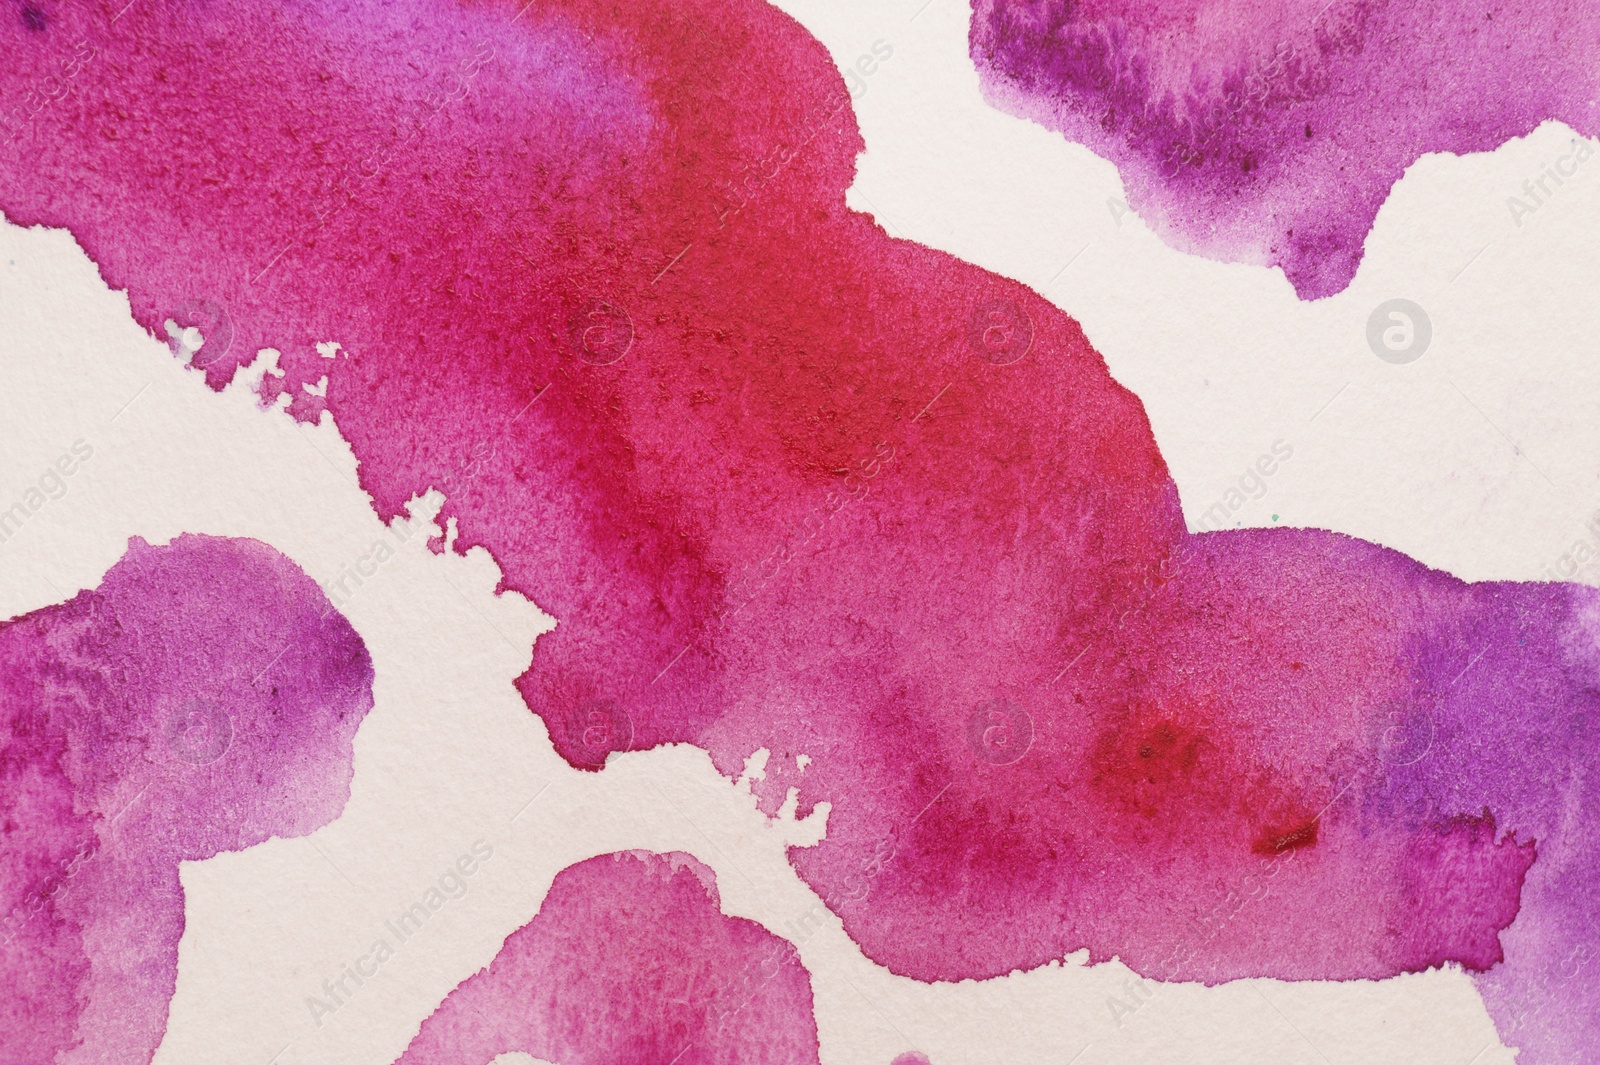 Photo of Blot of colorful watercolor paint on white paper, top view